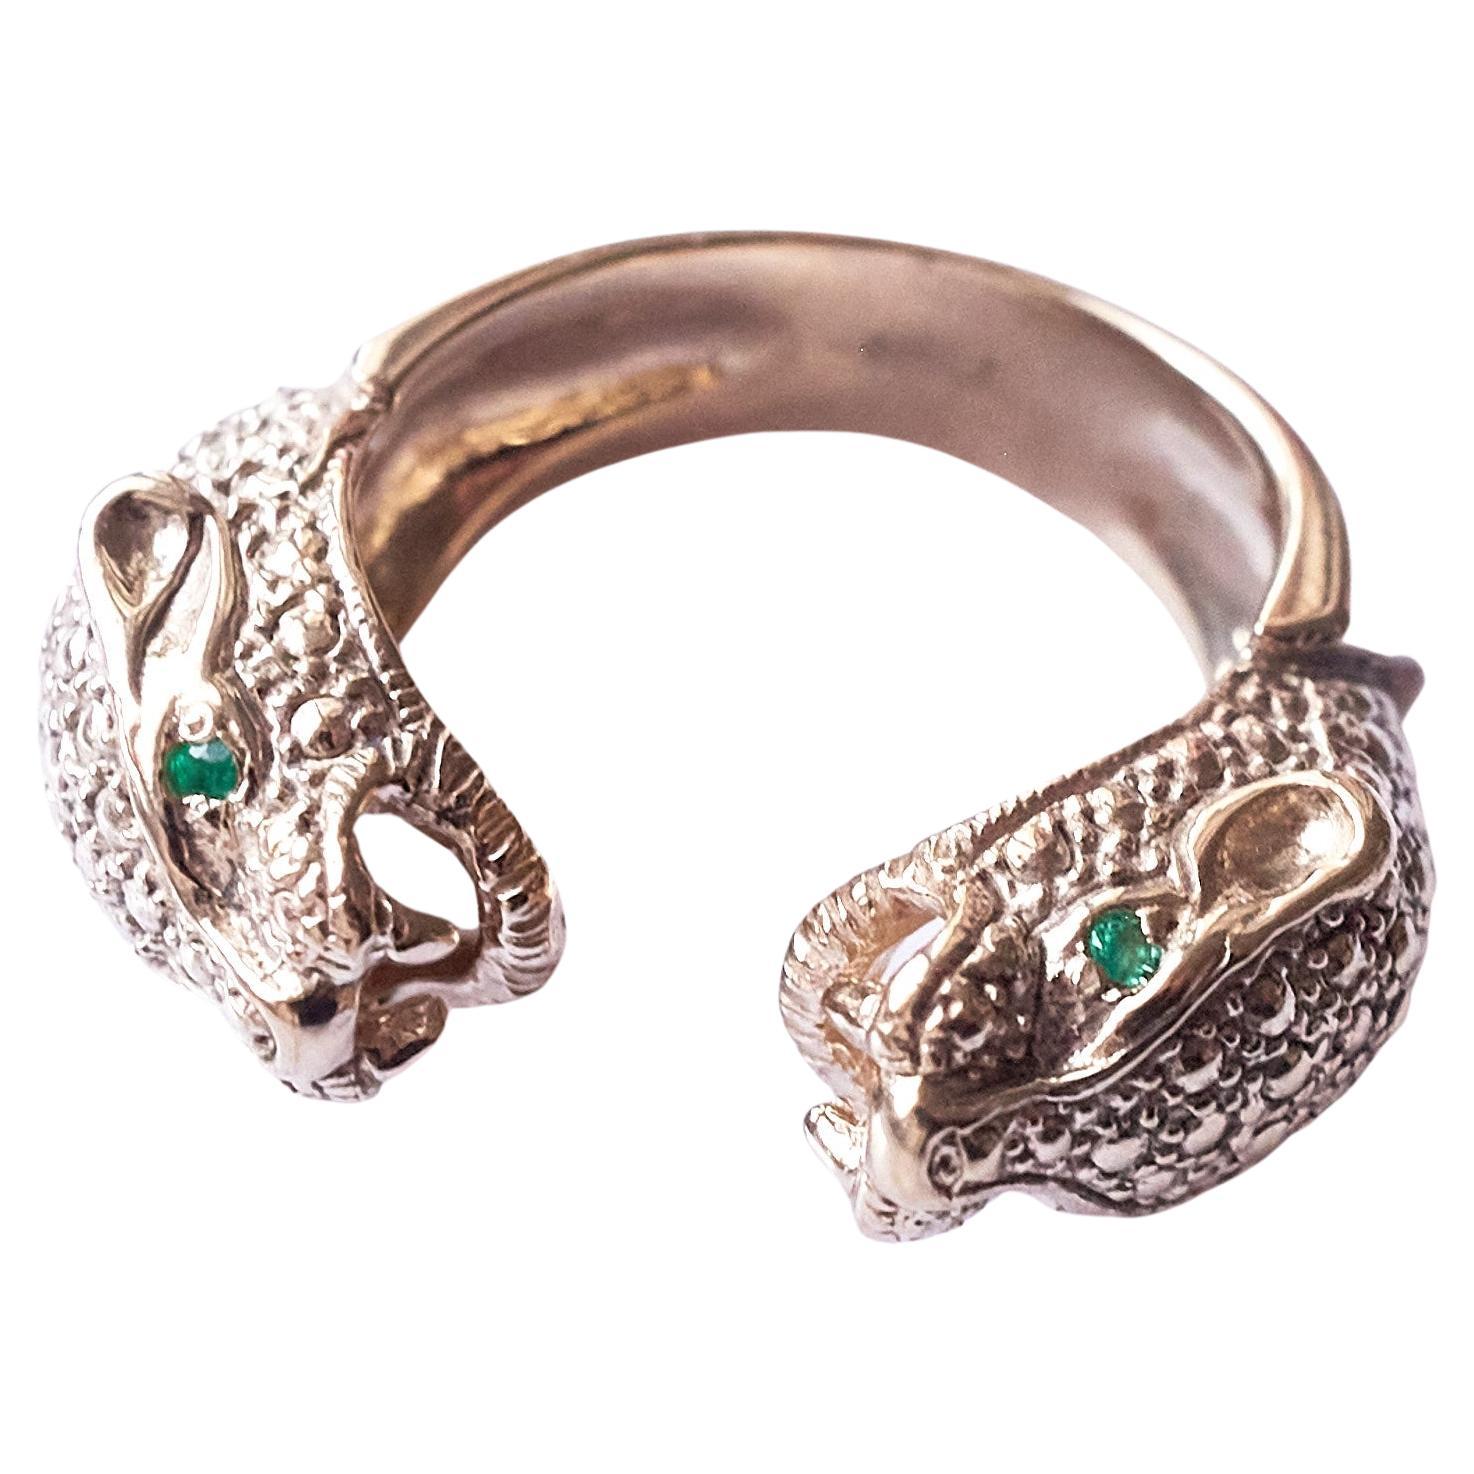 Emerald Jaguar Ring Bronze Animal Jewelry Cocktail Ring J Dauphin For Sale